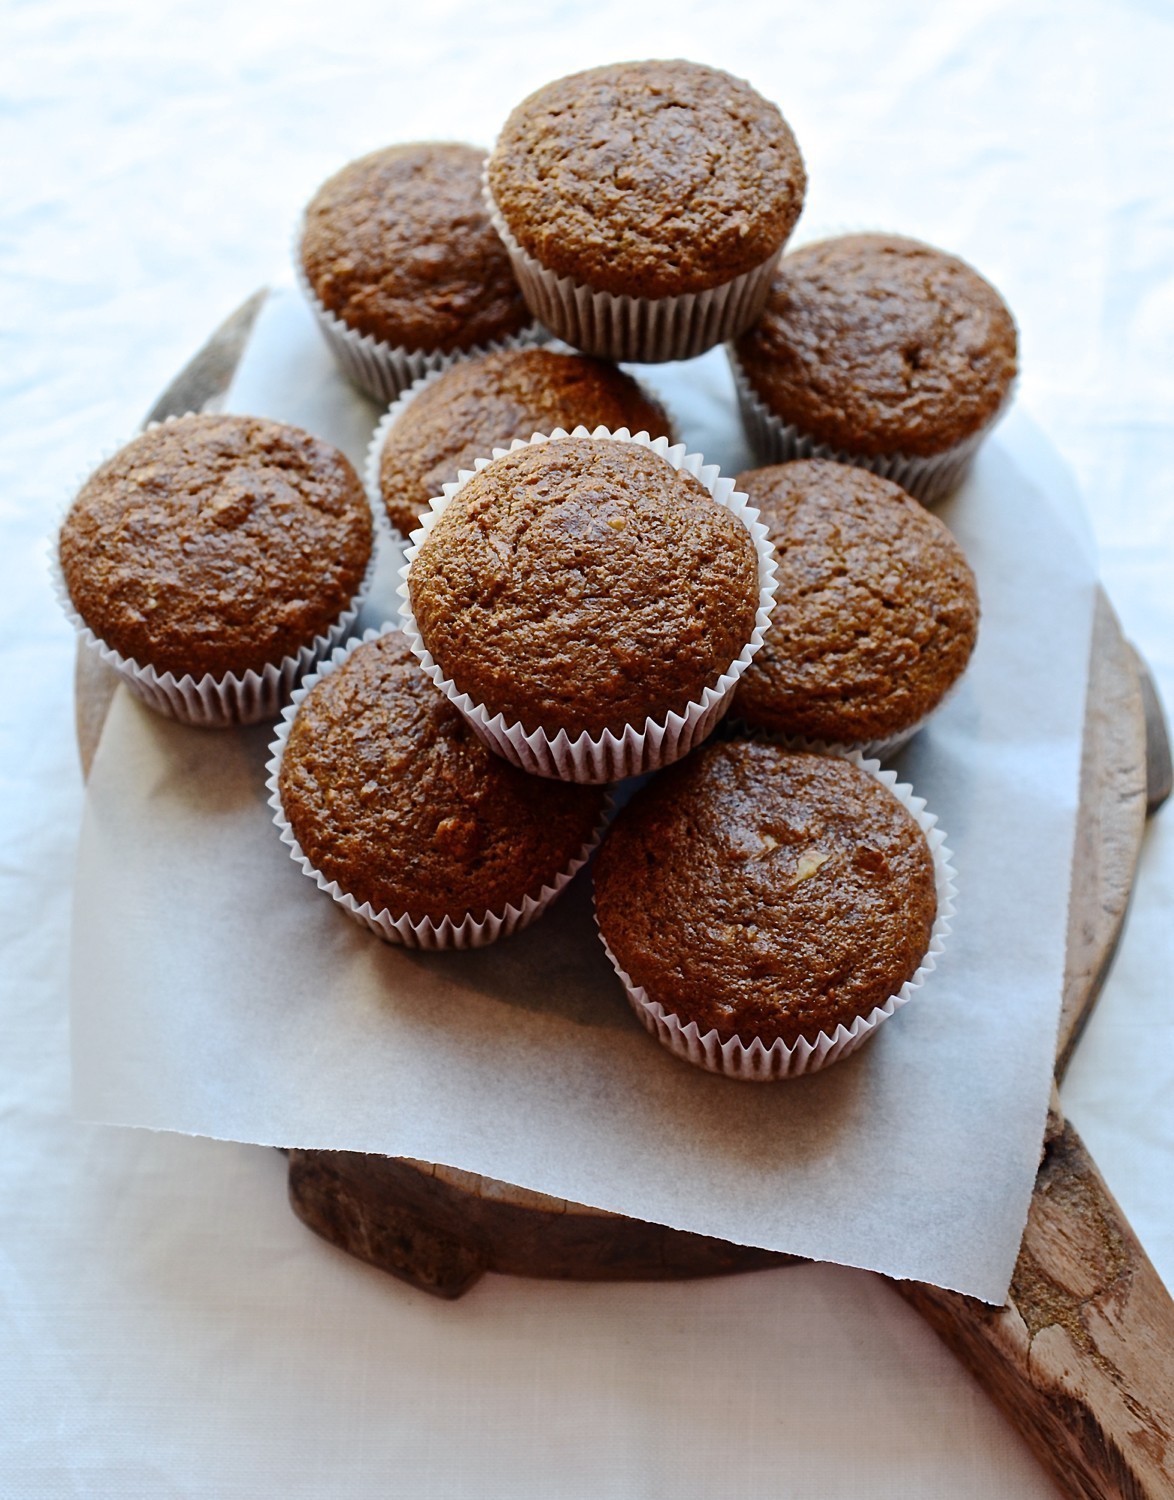 Carrot and apple bran muffins